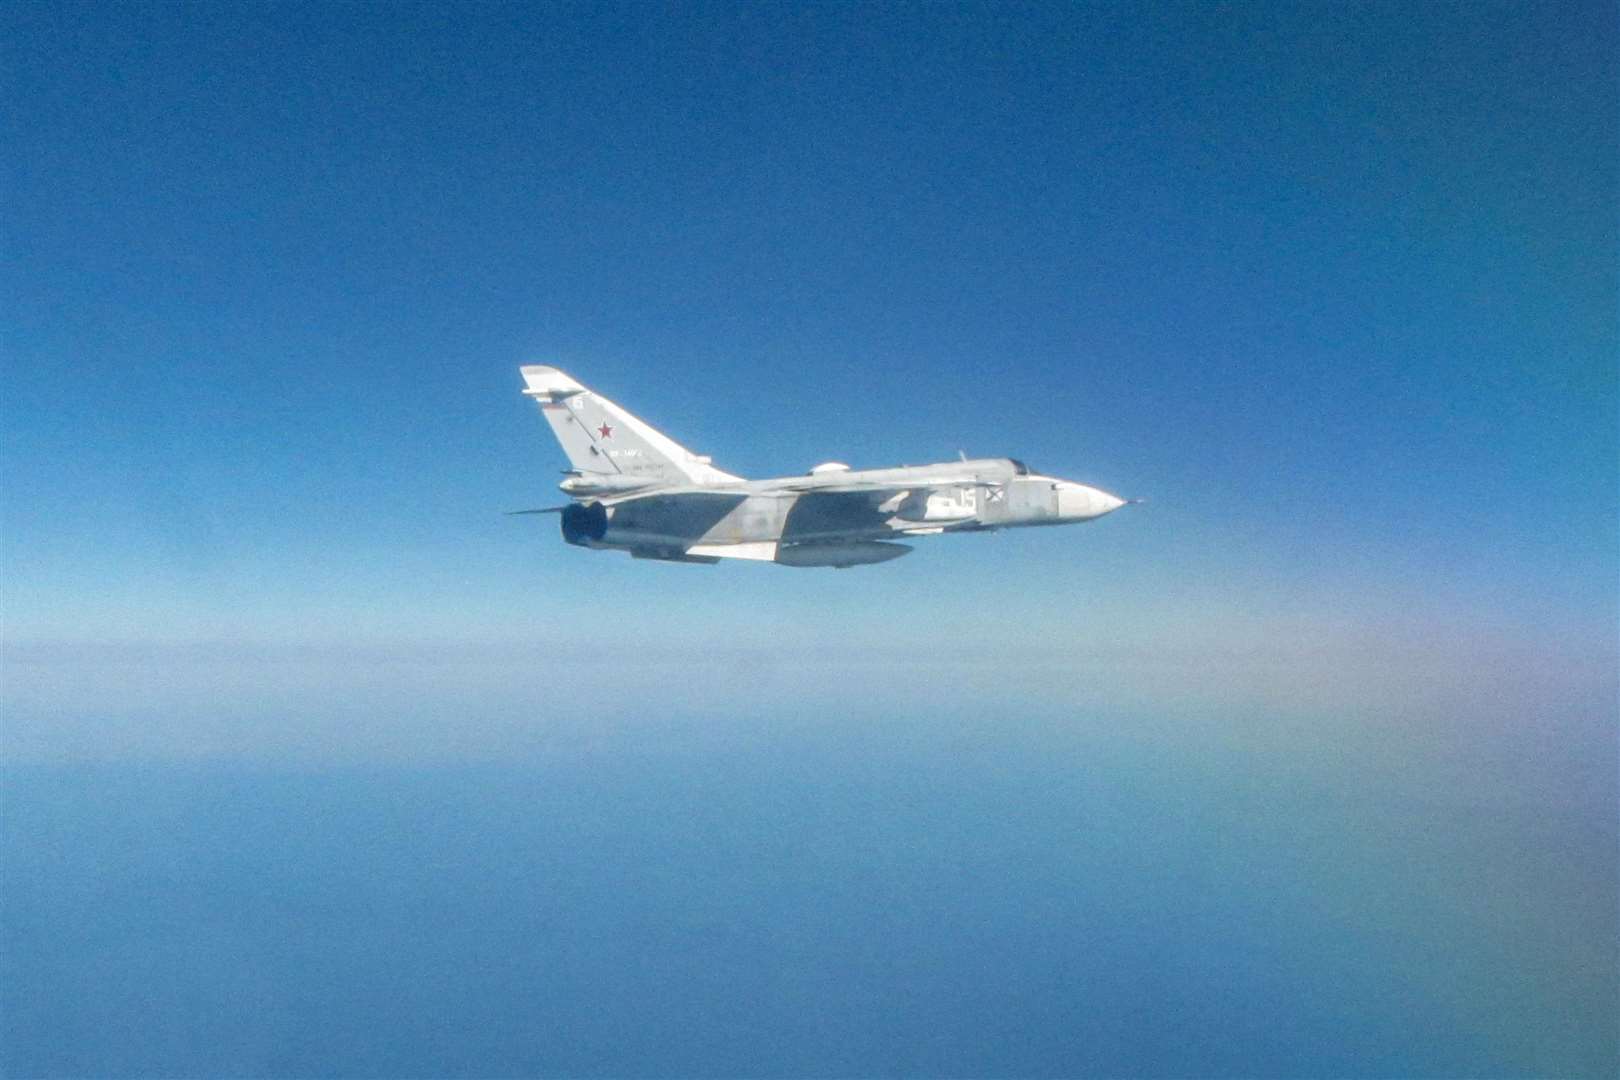 The Russian Sukhoi Su-24 as it got close to Romanian airspace.